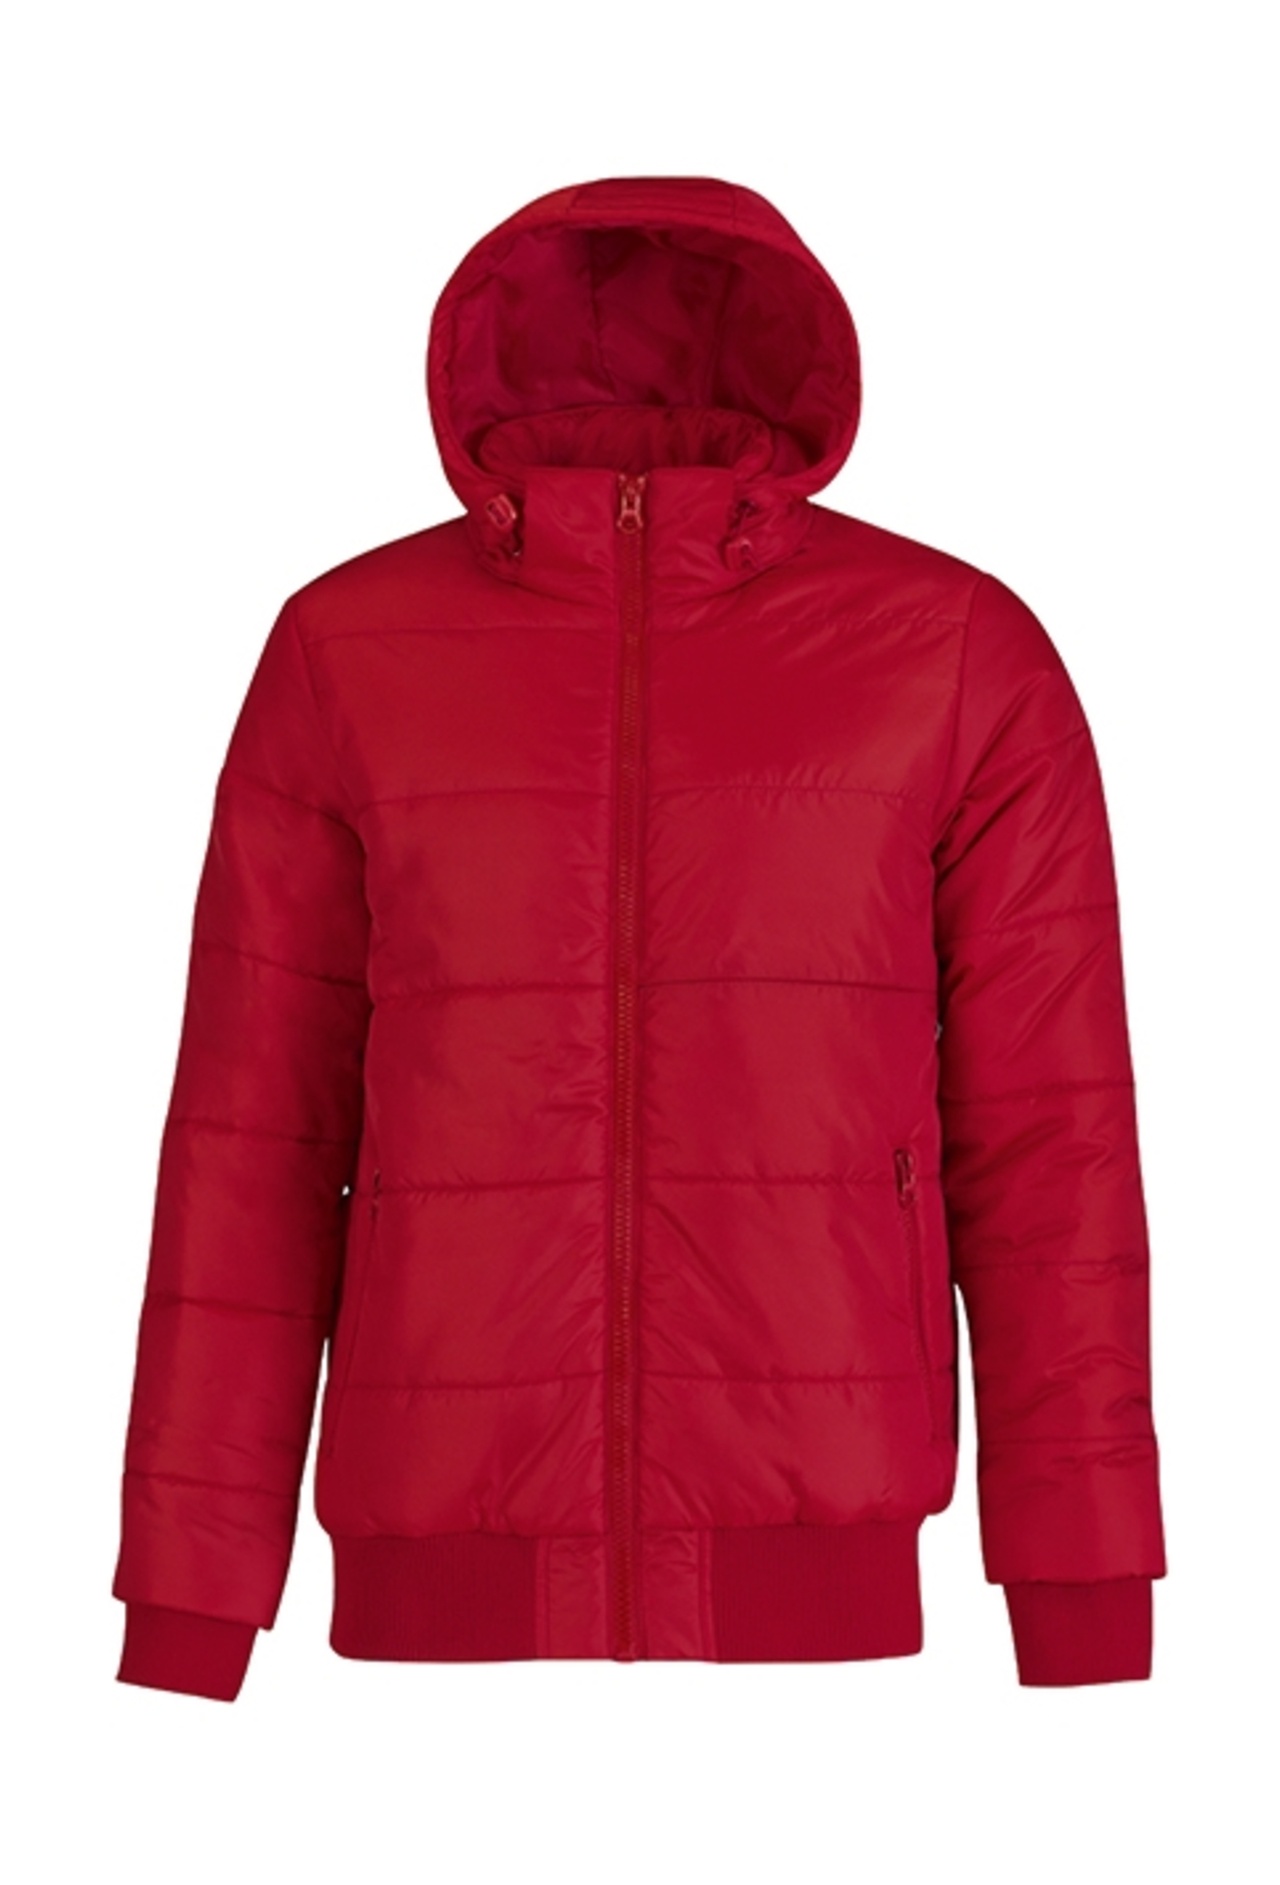 B and C Collection B&C Superhood /men - Red/Black - S